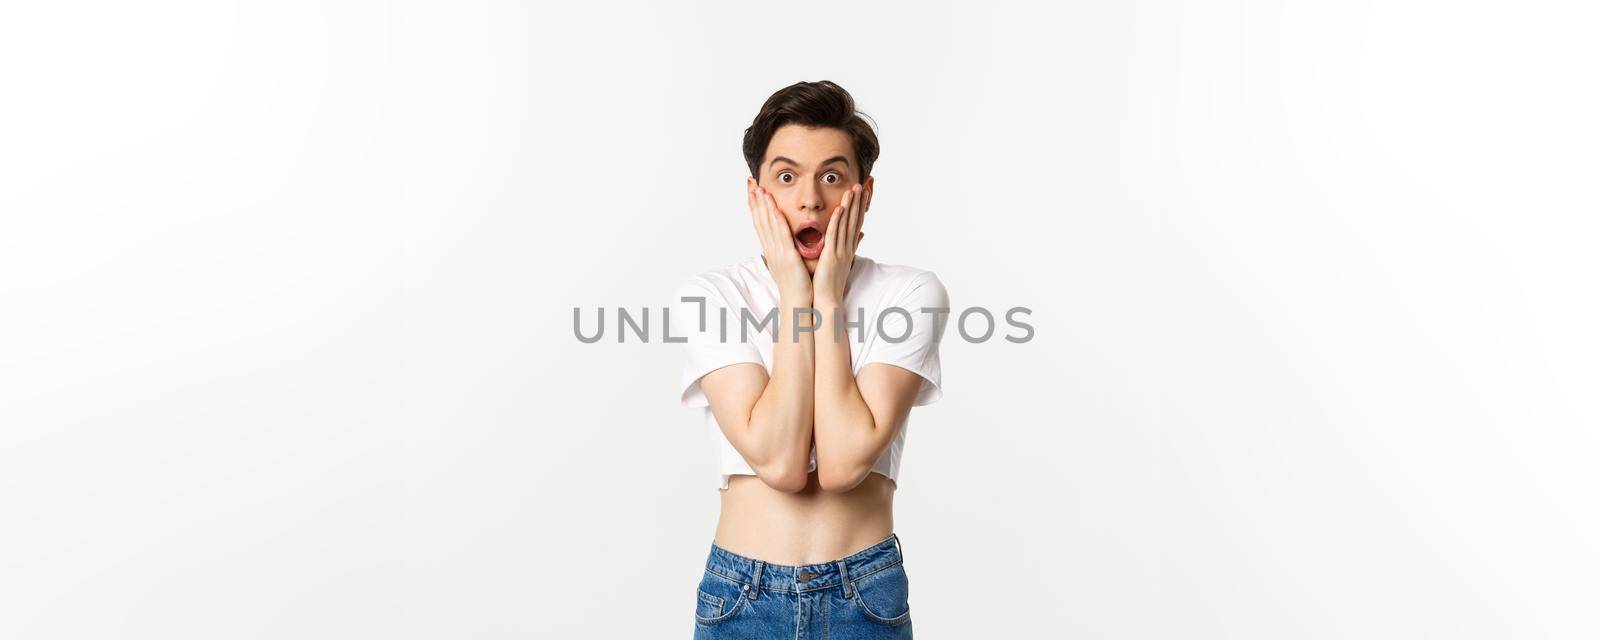 Lgbtq and pride concept. Image of surprised androgynous guy gasping amazed and staring at camera in awe, standing over white background.